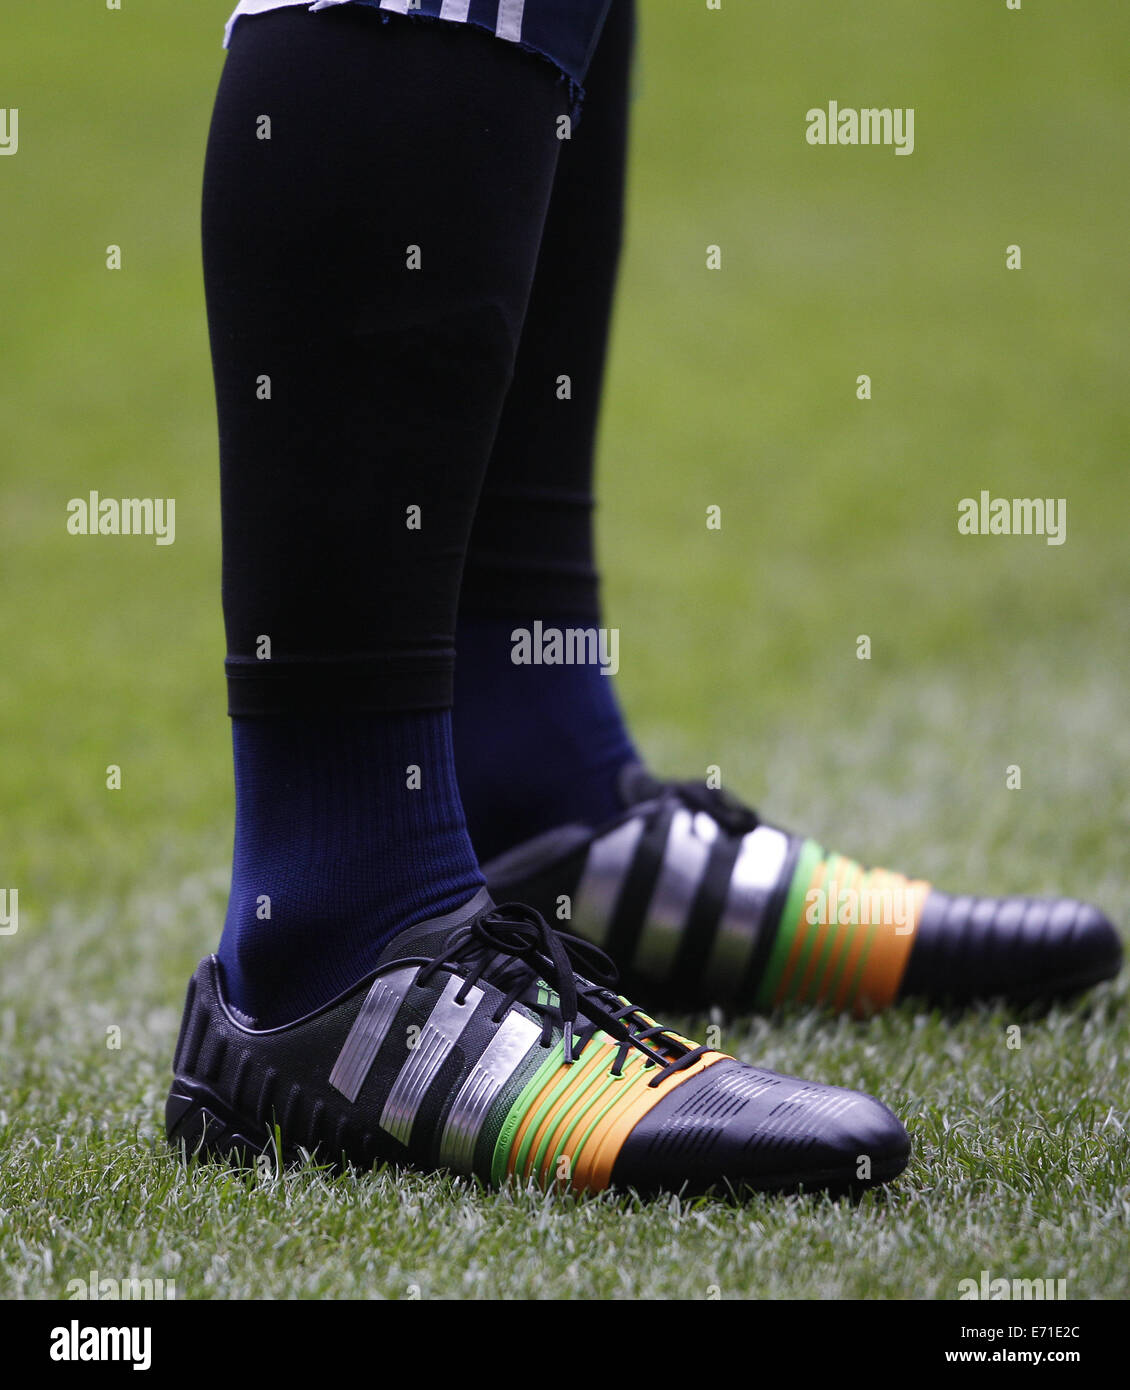 The shoes of goal keeper Manuel Neuer are pictured the training of the  German national soccer team in Duesseldorf, Germany, 02 September 2014.  Germany plays against Argentina in Duesseldorf on 03 September